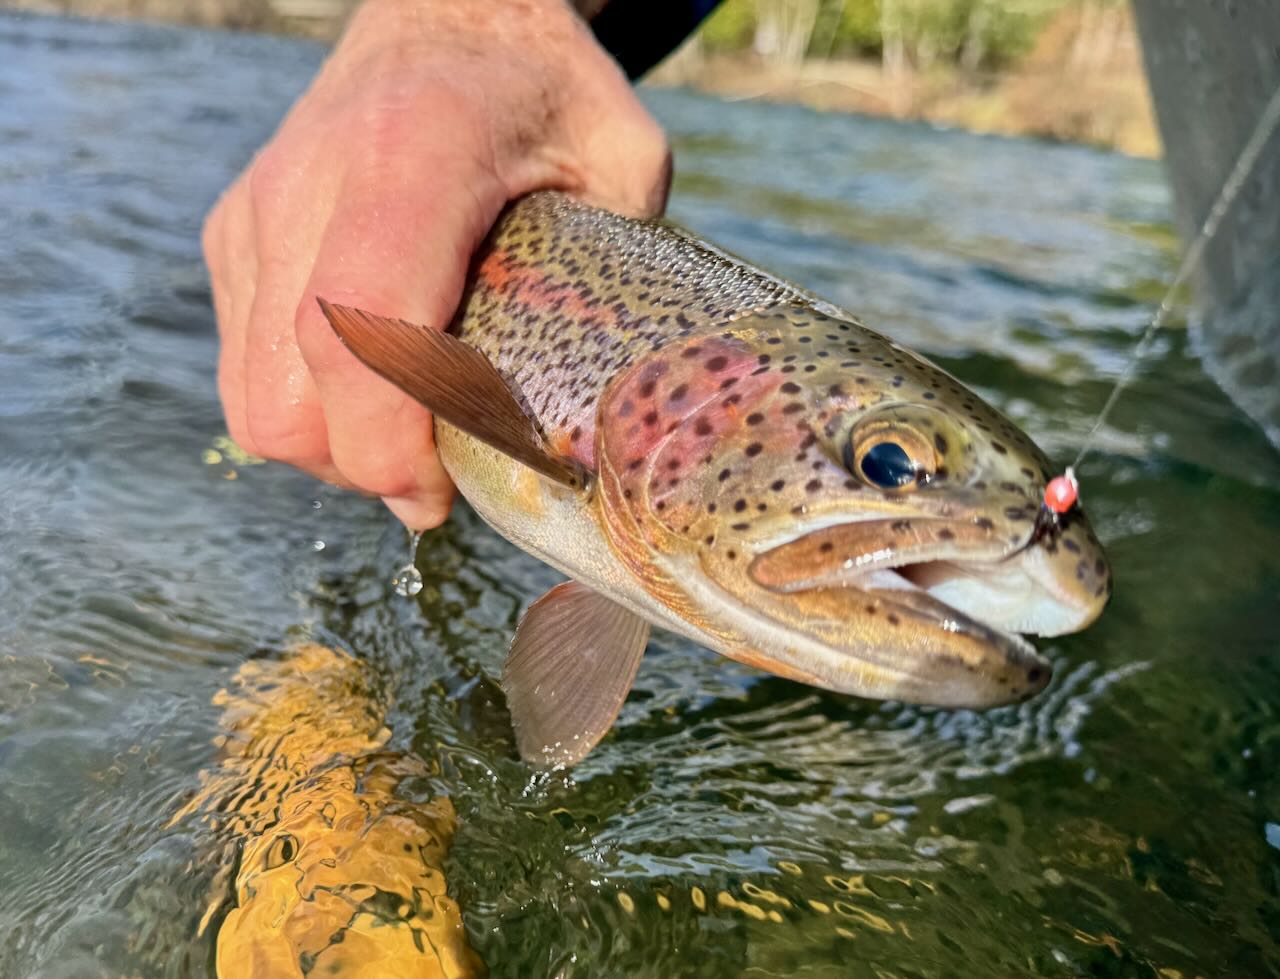 Perfect Hatch Fly Fishing - Trout Unlimited